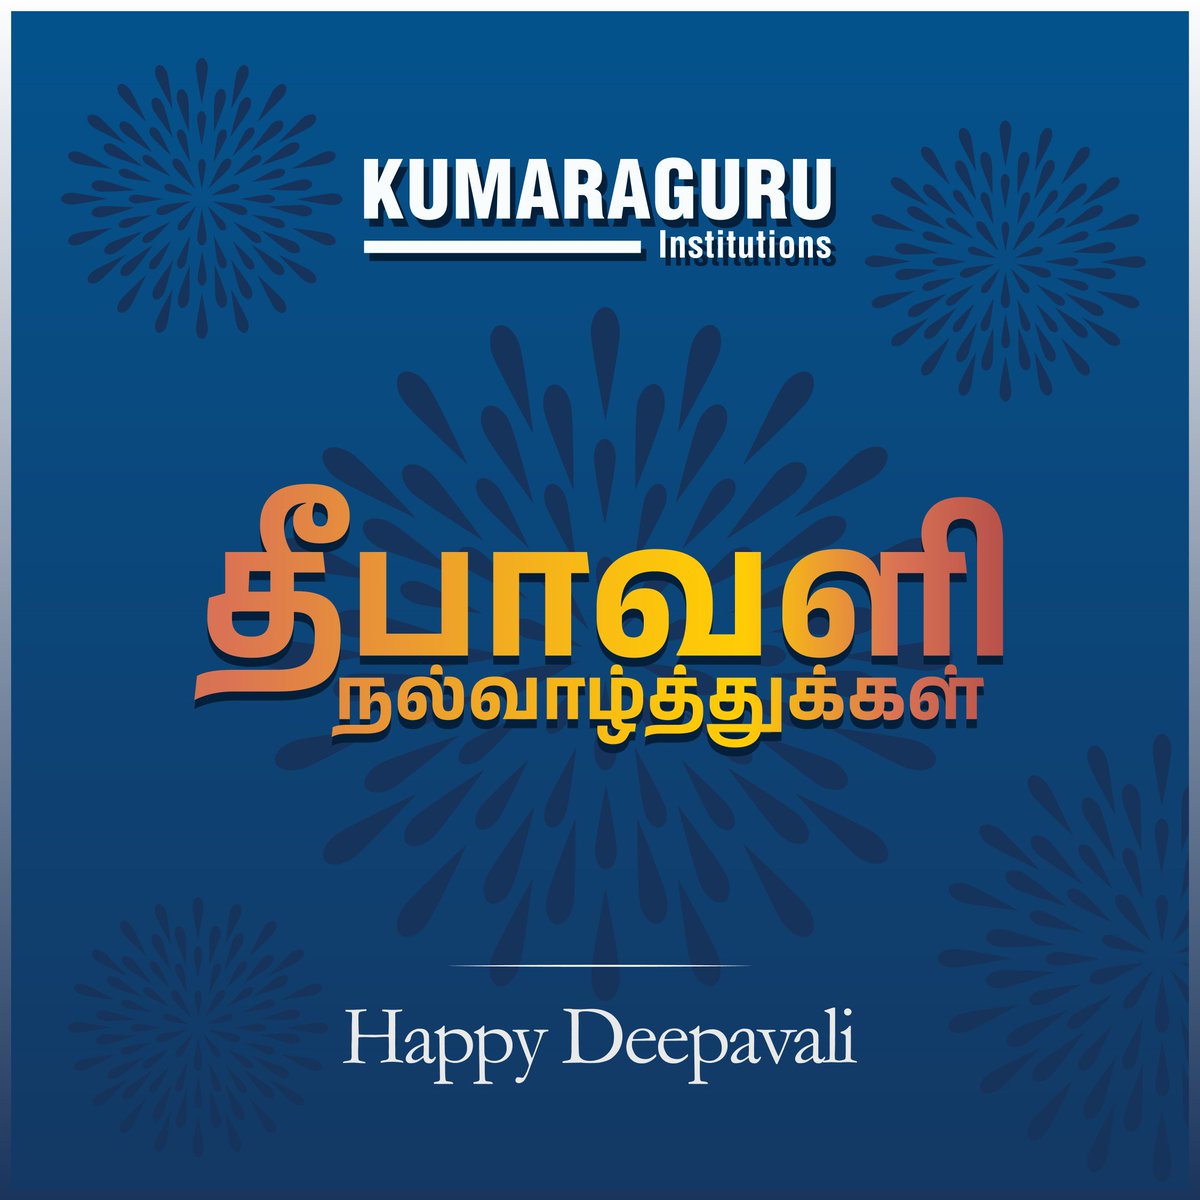 Let the festival of lights illuminate the goodness in thoughts, words and deeds among us. Kumaraguru Institutions wishes everyone a Happy Deepavali.

#happydeepavali #festivaloflights #kumaraguruinstitutions #KCT